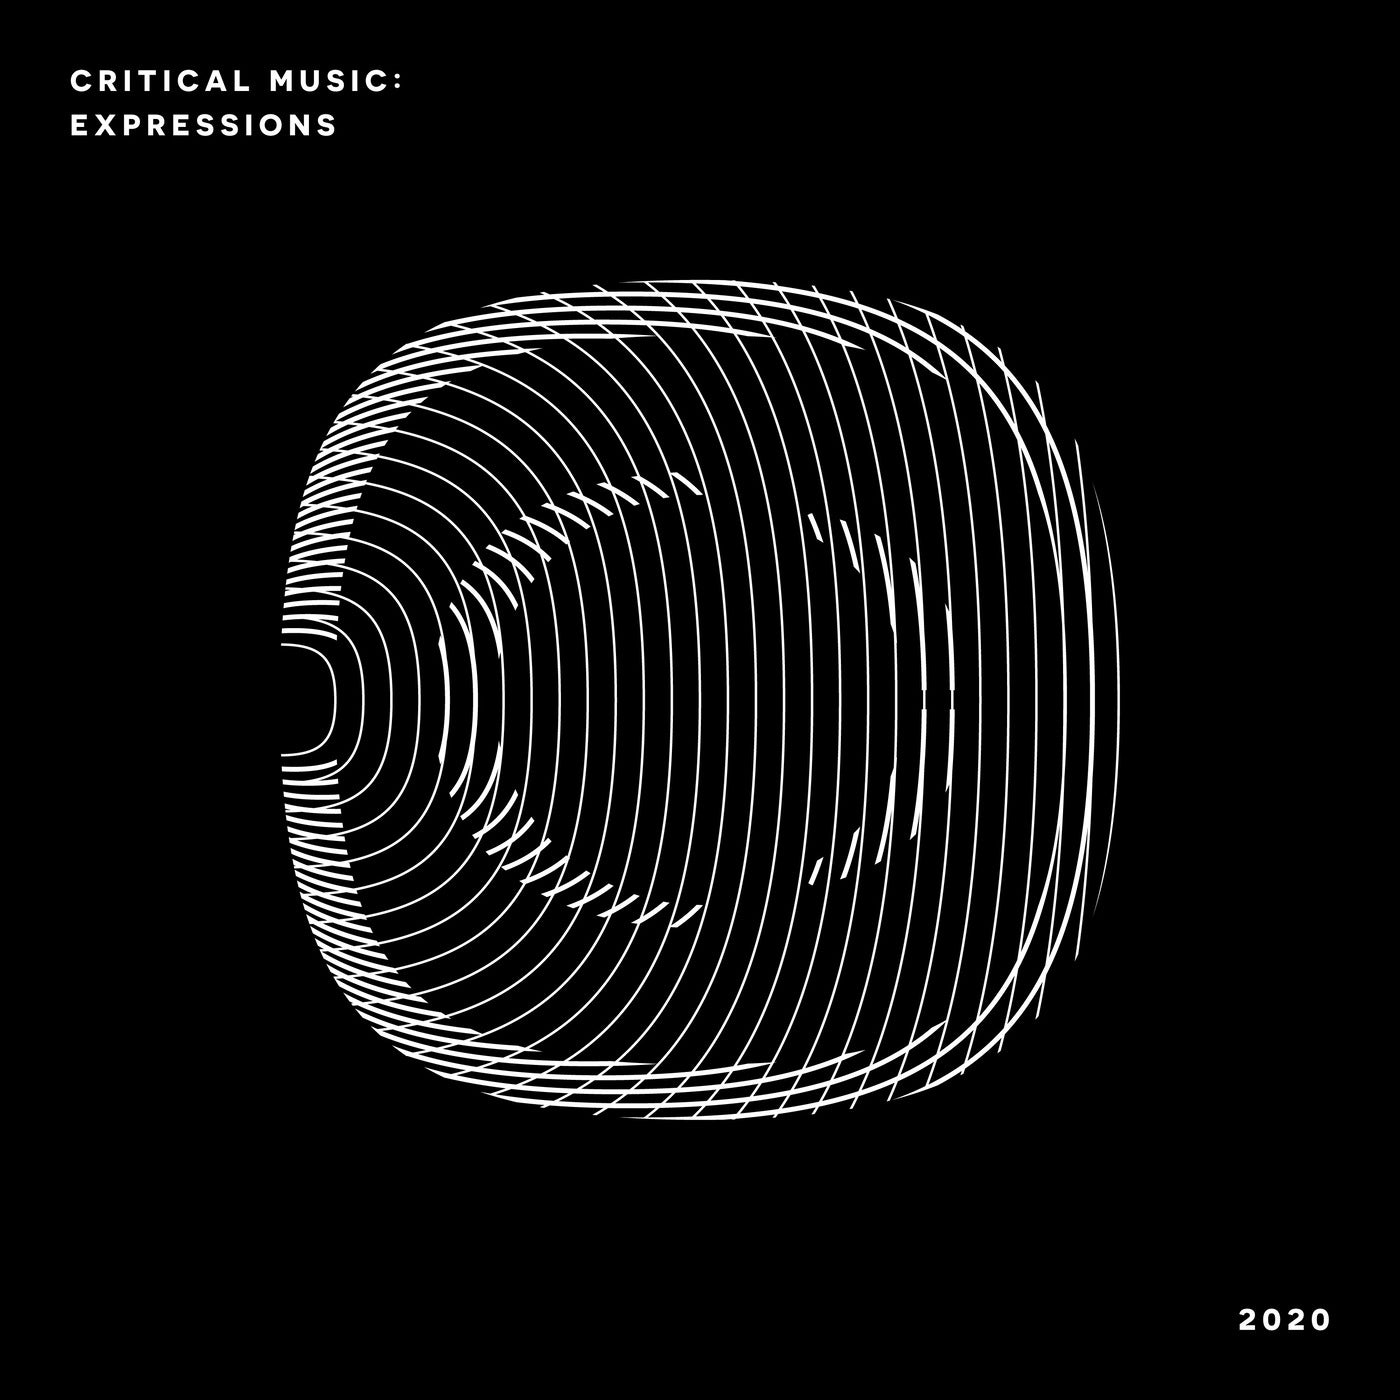 Critical Music: Expressions